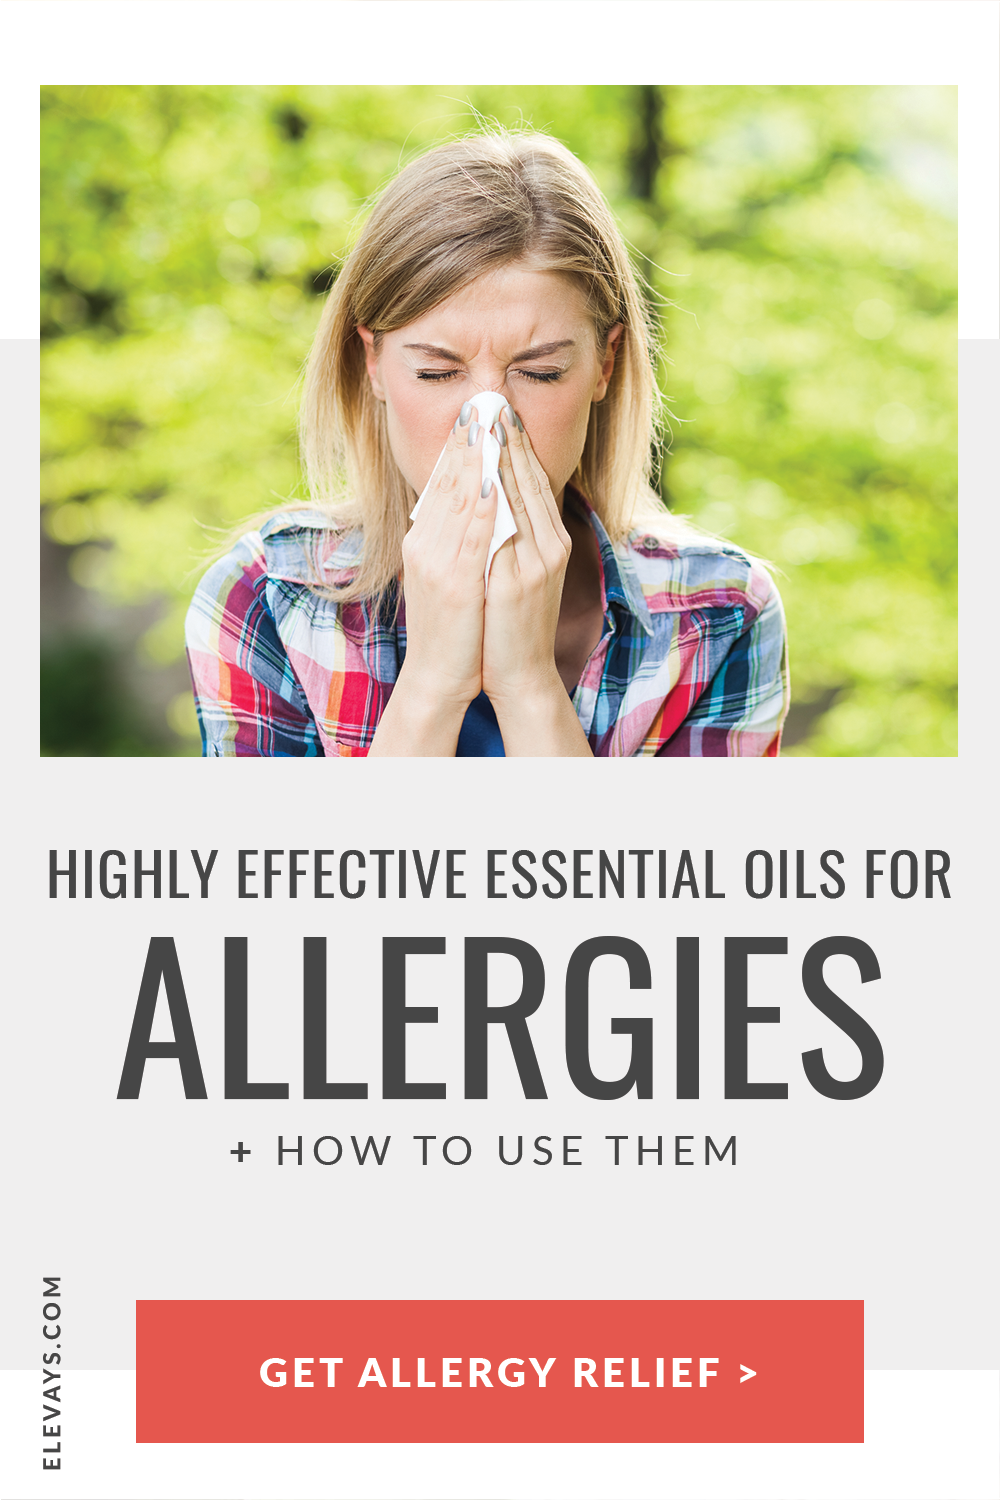 How to Use High Effective Essential Oils for Allergies & Allergy Relief